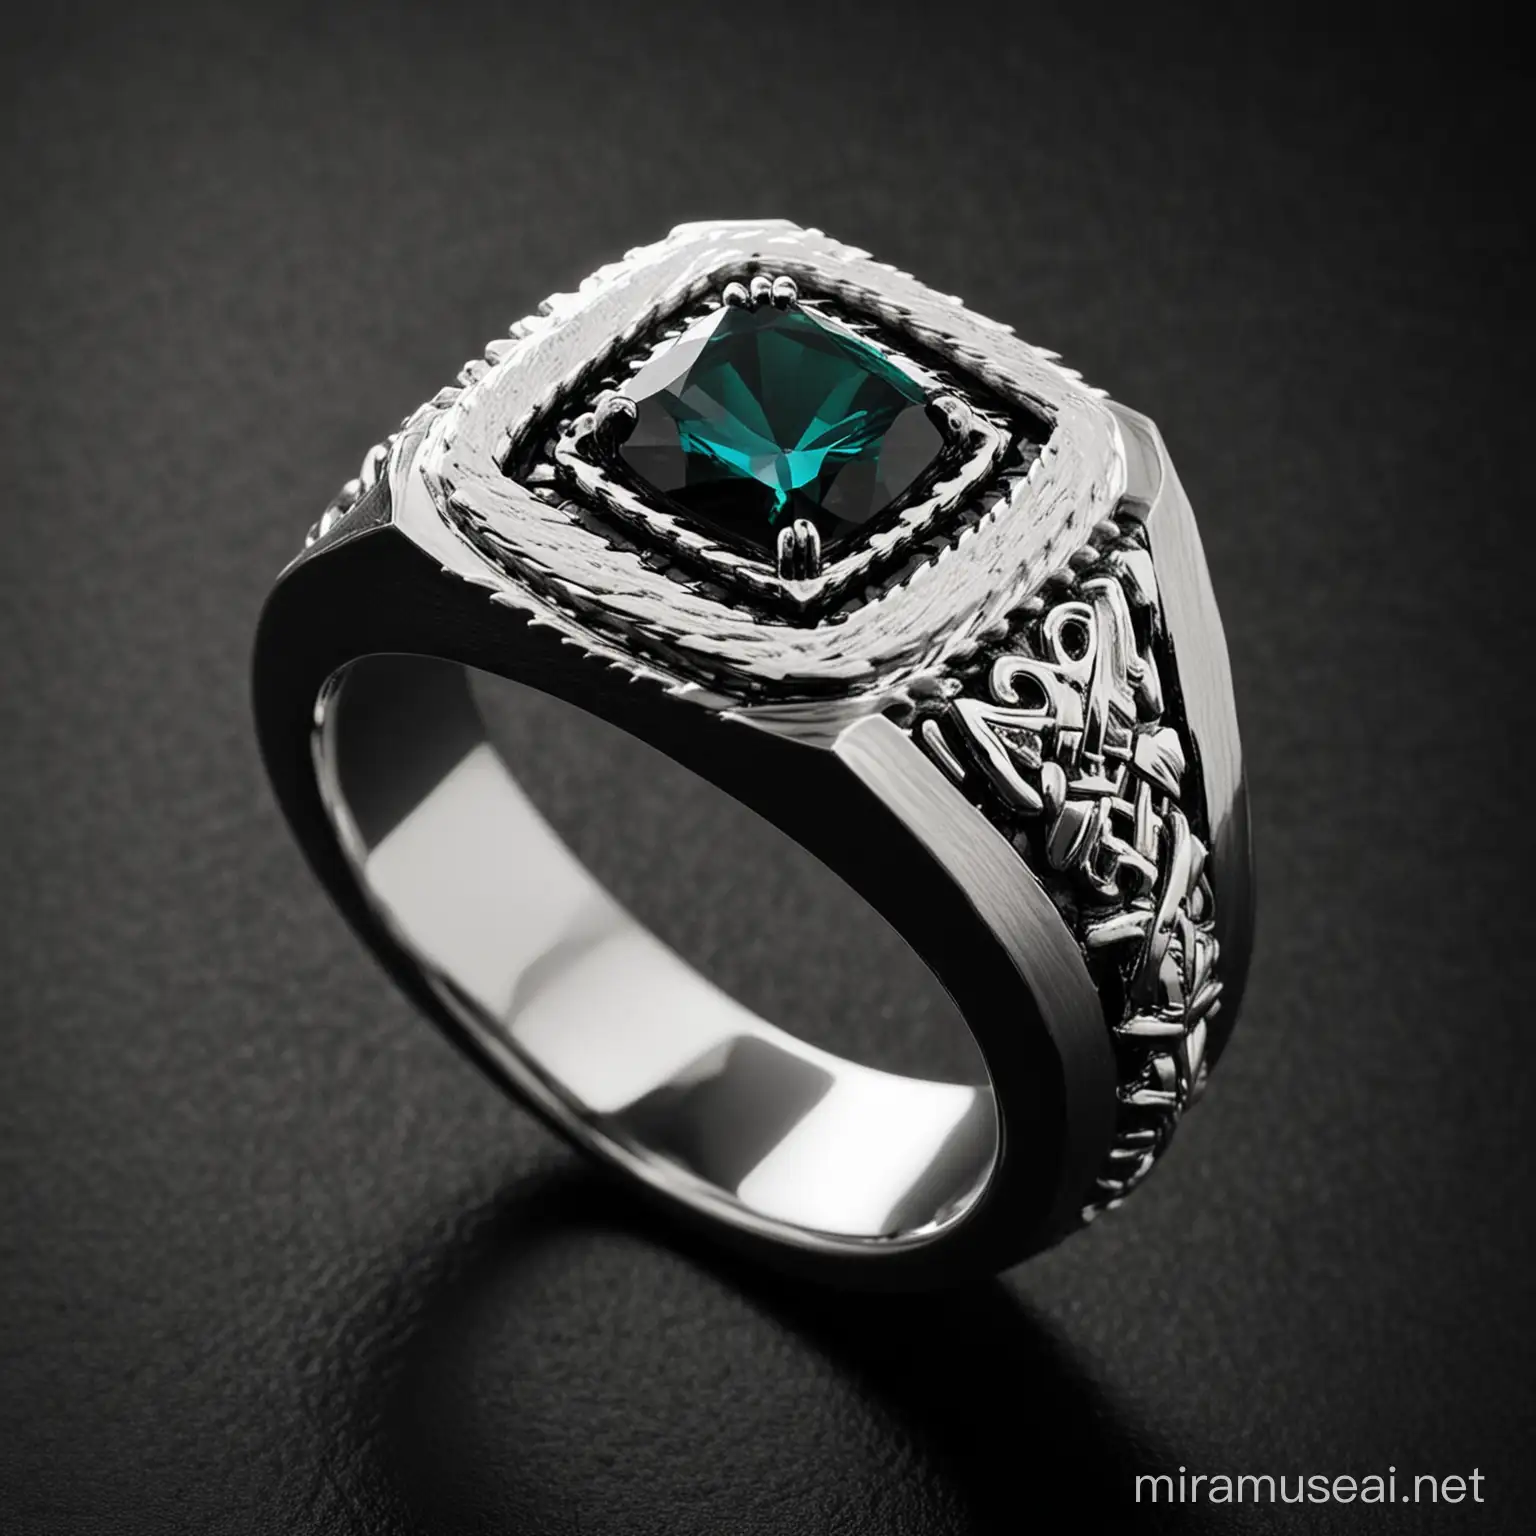 adv for men's ring with dark background 